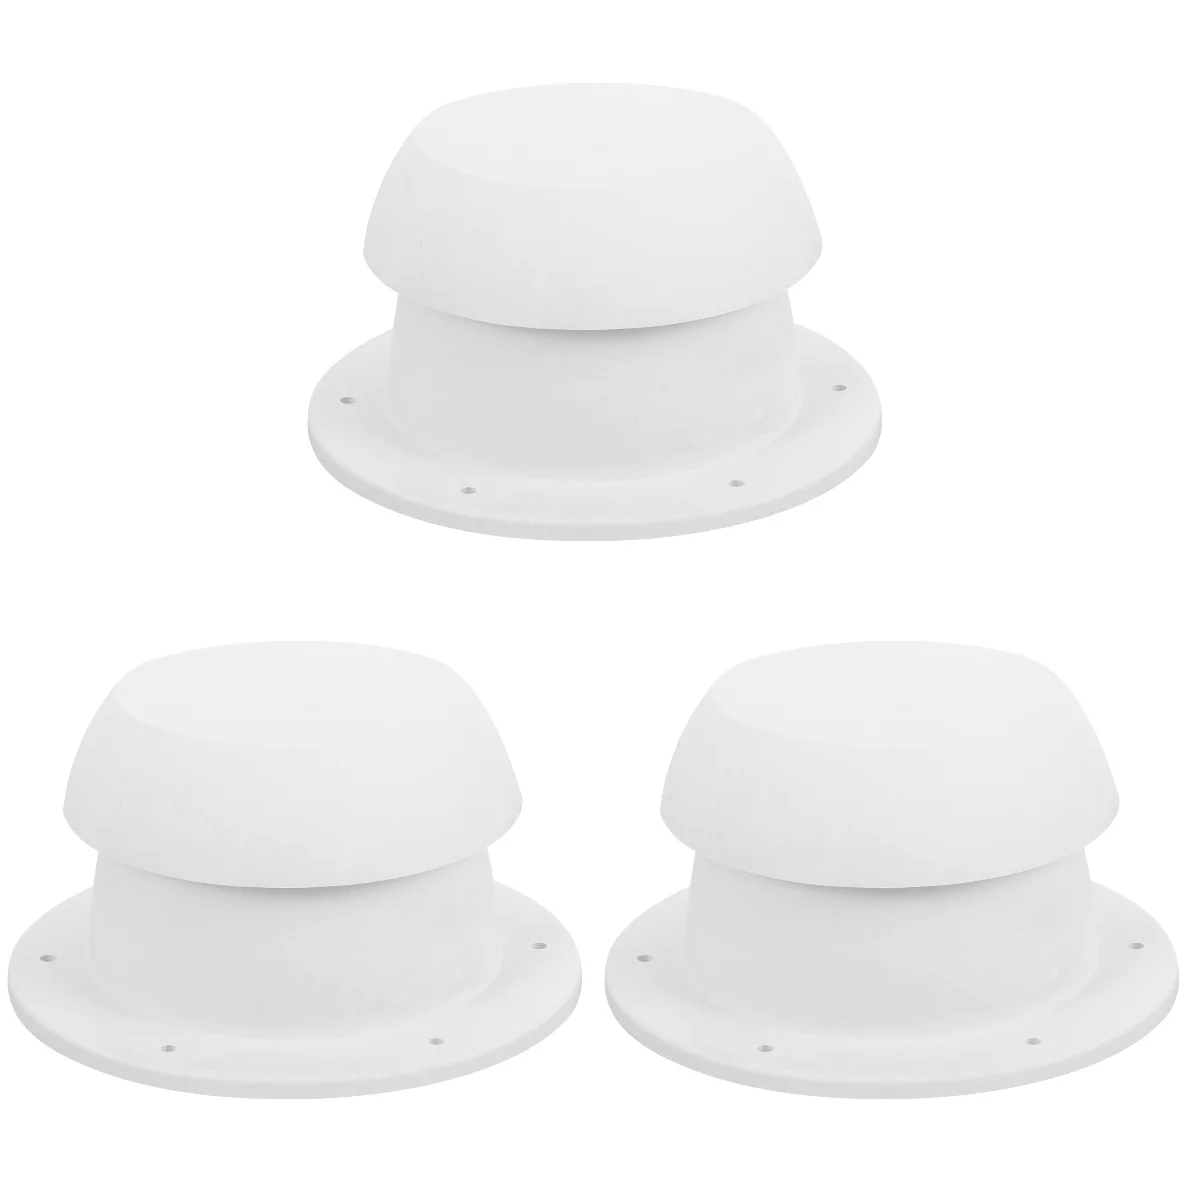 

Set 3 RV Duct Cover Motorhome Accessories Vent Covers Camper Roof Cap Sewer Refrigerator Replacement Top Loading